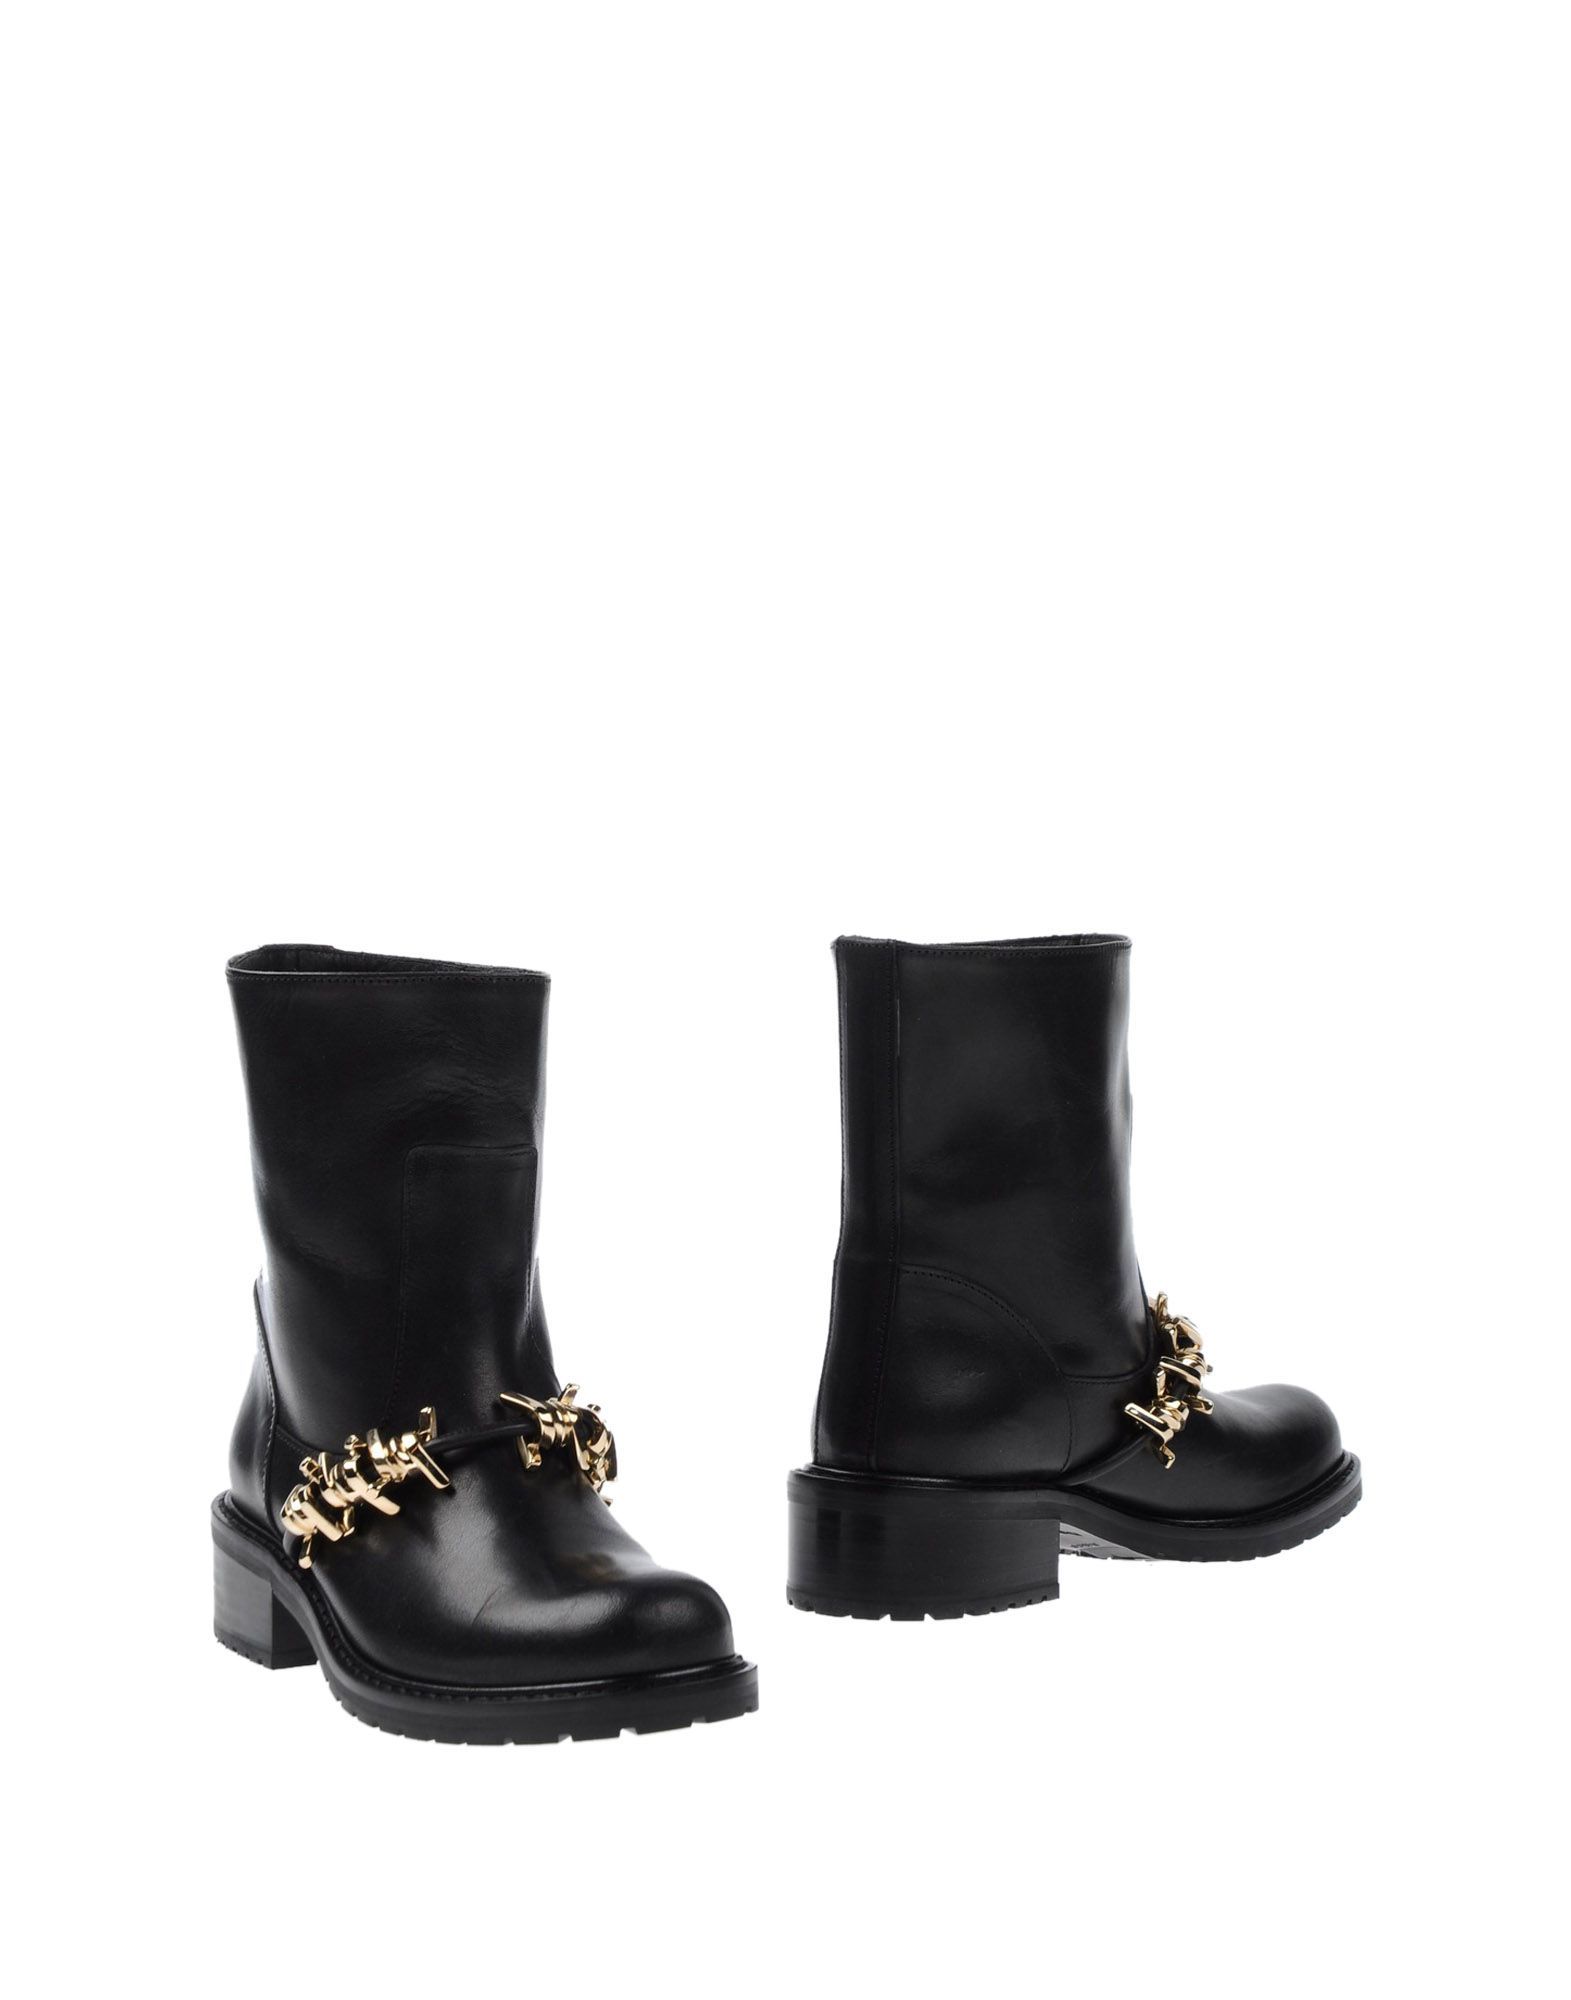 DSQUARED2 Ankle boots | YOOX (US)